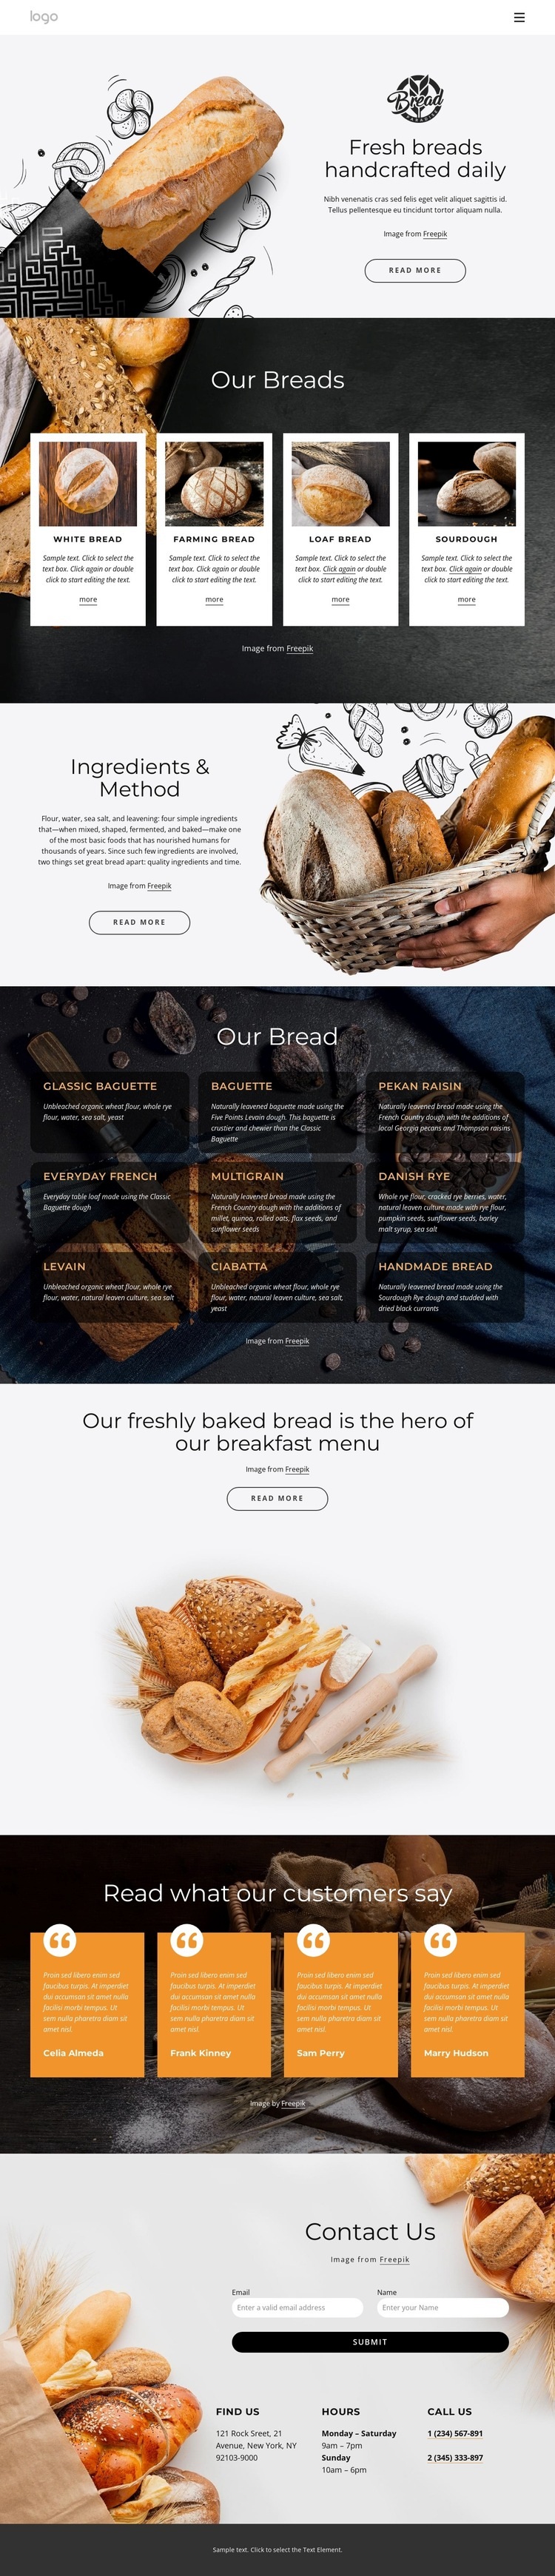 Fresh bread handcrafted every day Squarespace Template Alternative